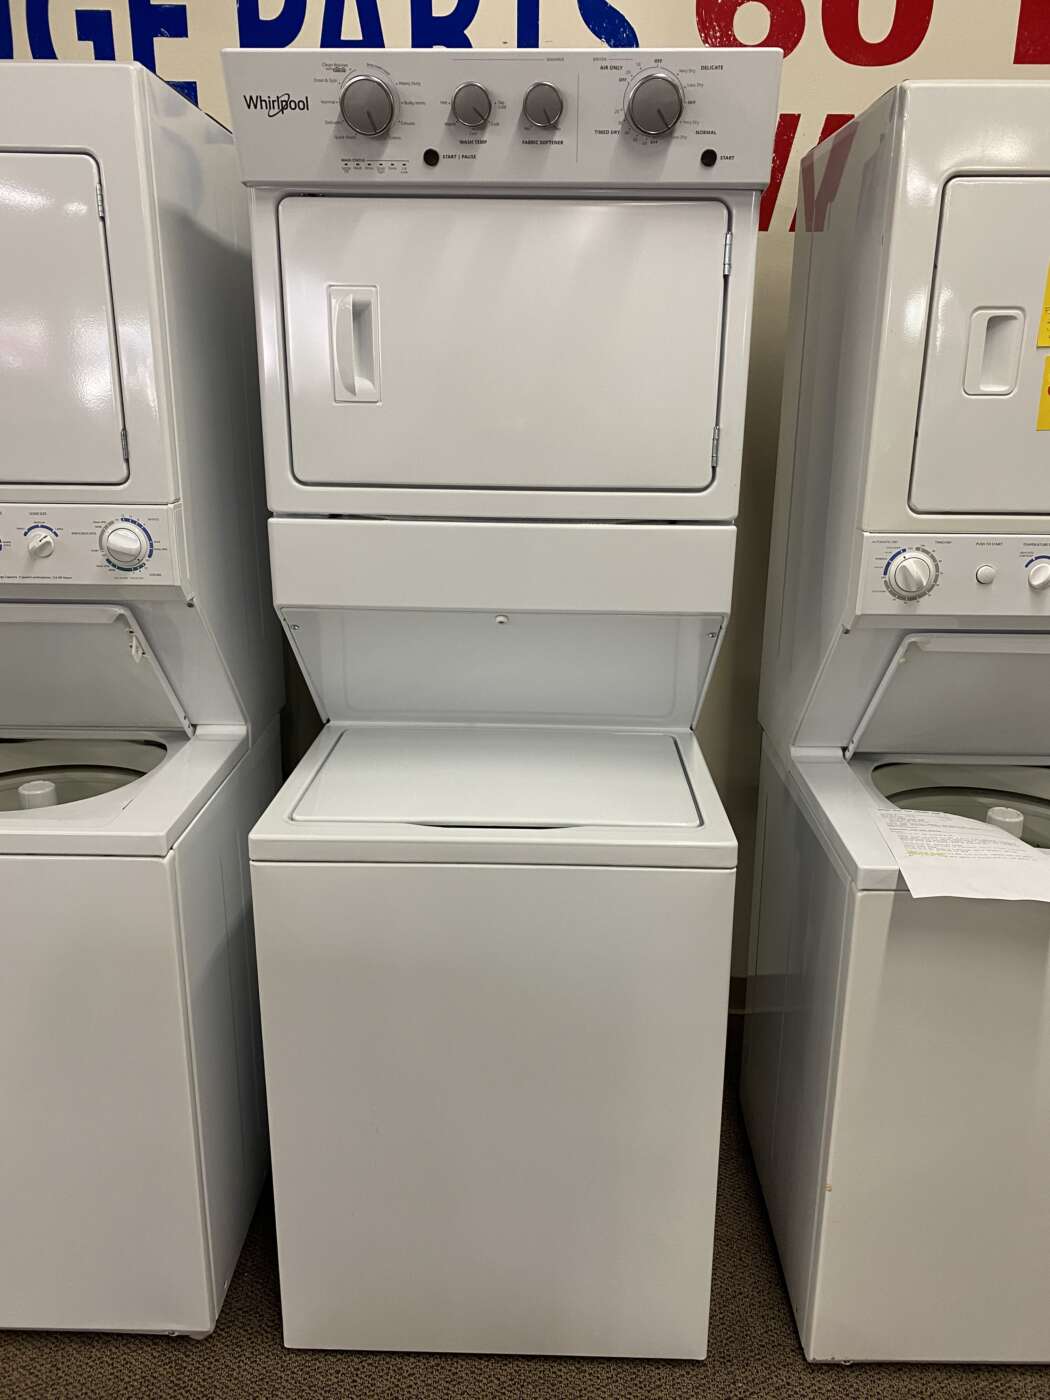 Reconditioned WHIRLPOOL 27″ Laundry Center / 3.5 Cu. Ft. Top-Load Washer / 5.9 Cu. Ft. Electric Dryer – White